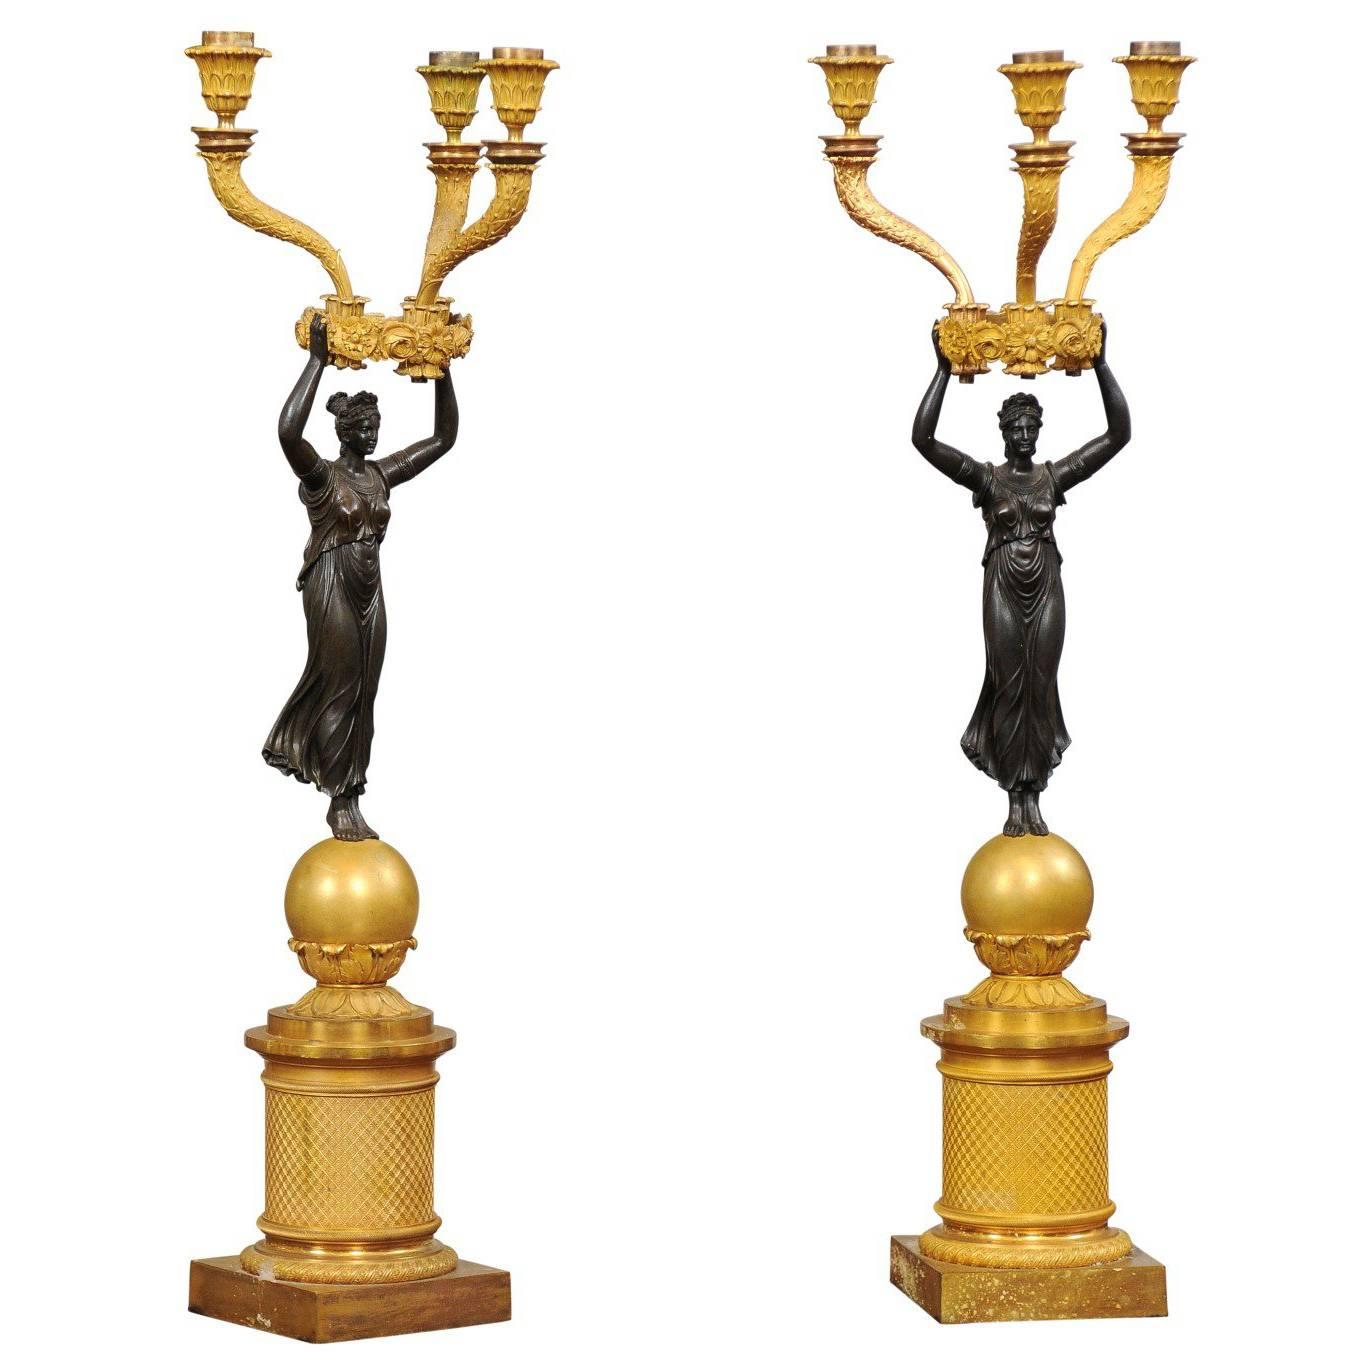 Pair of Empire Gilt Bronze Candelabra with Black Patinated Figures, France, 1810